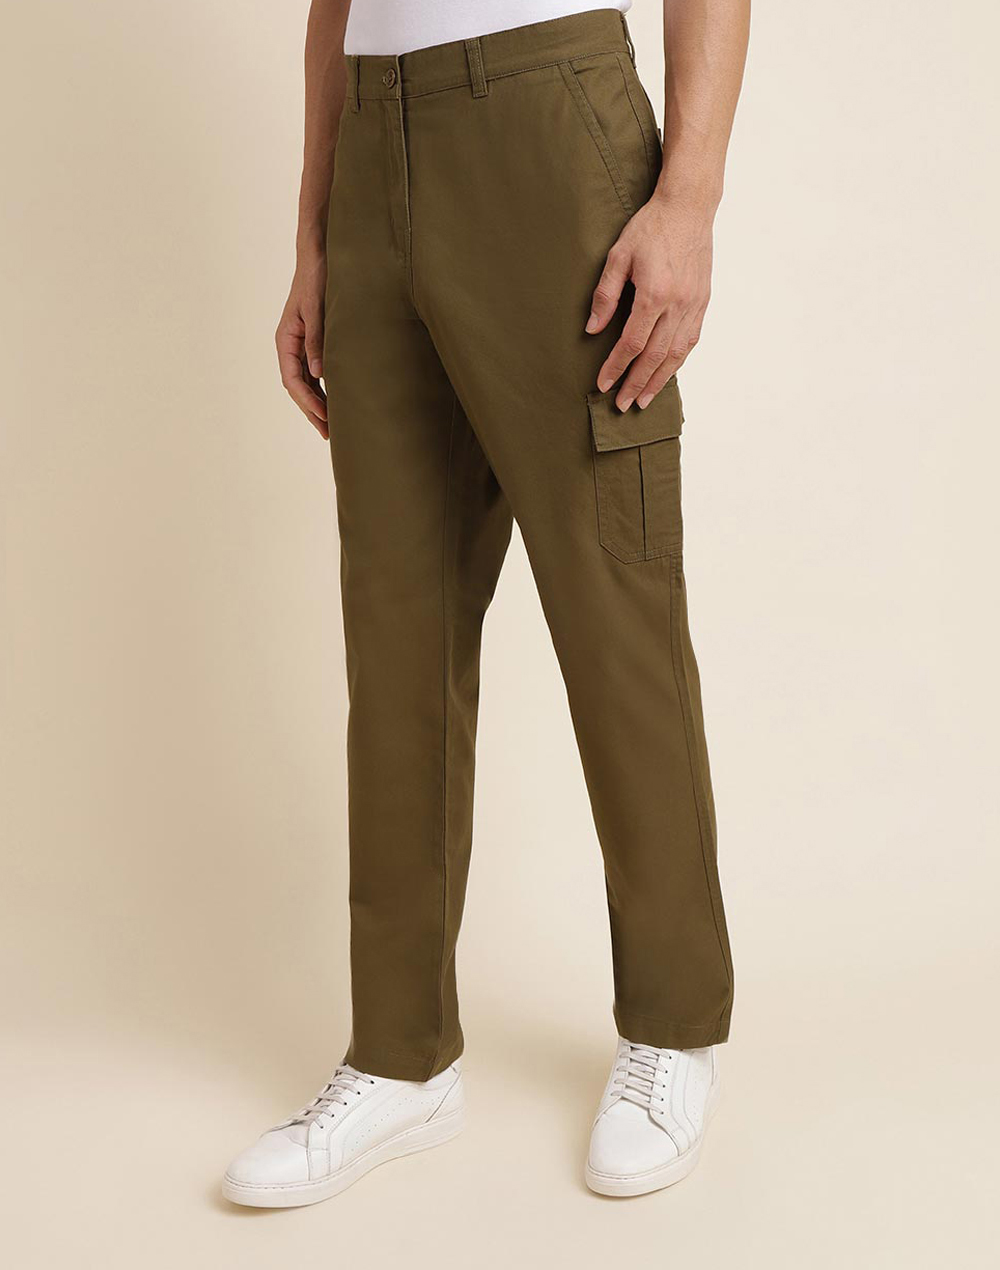 Men's Clearance Trousers & Shorts, Outdoor Clothing Offers